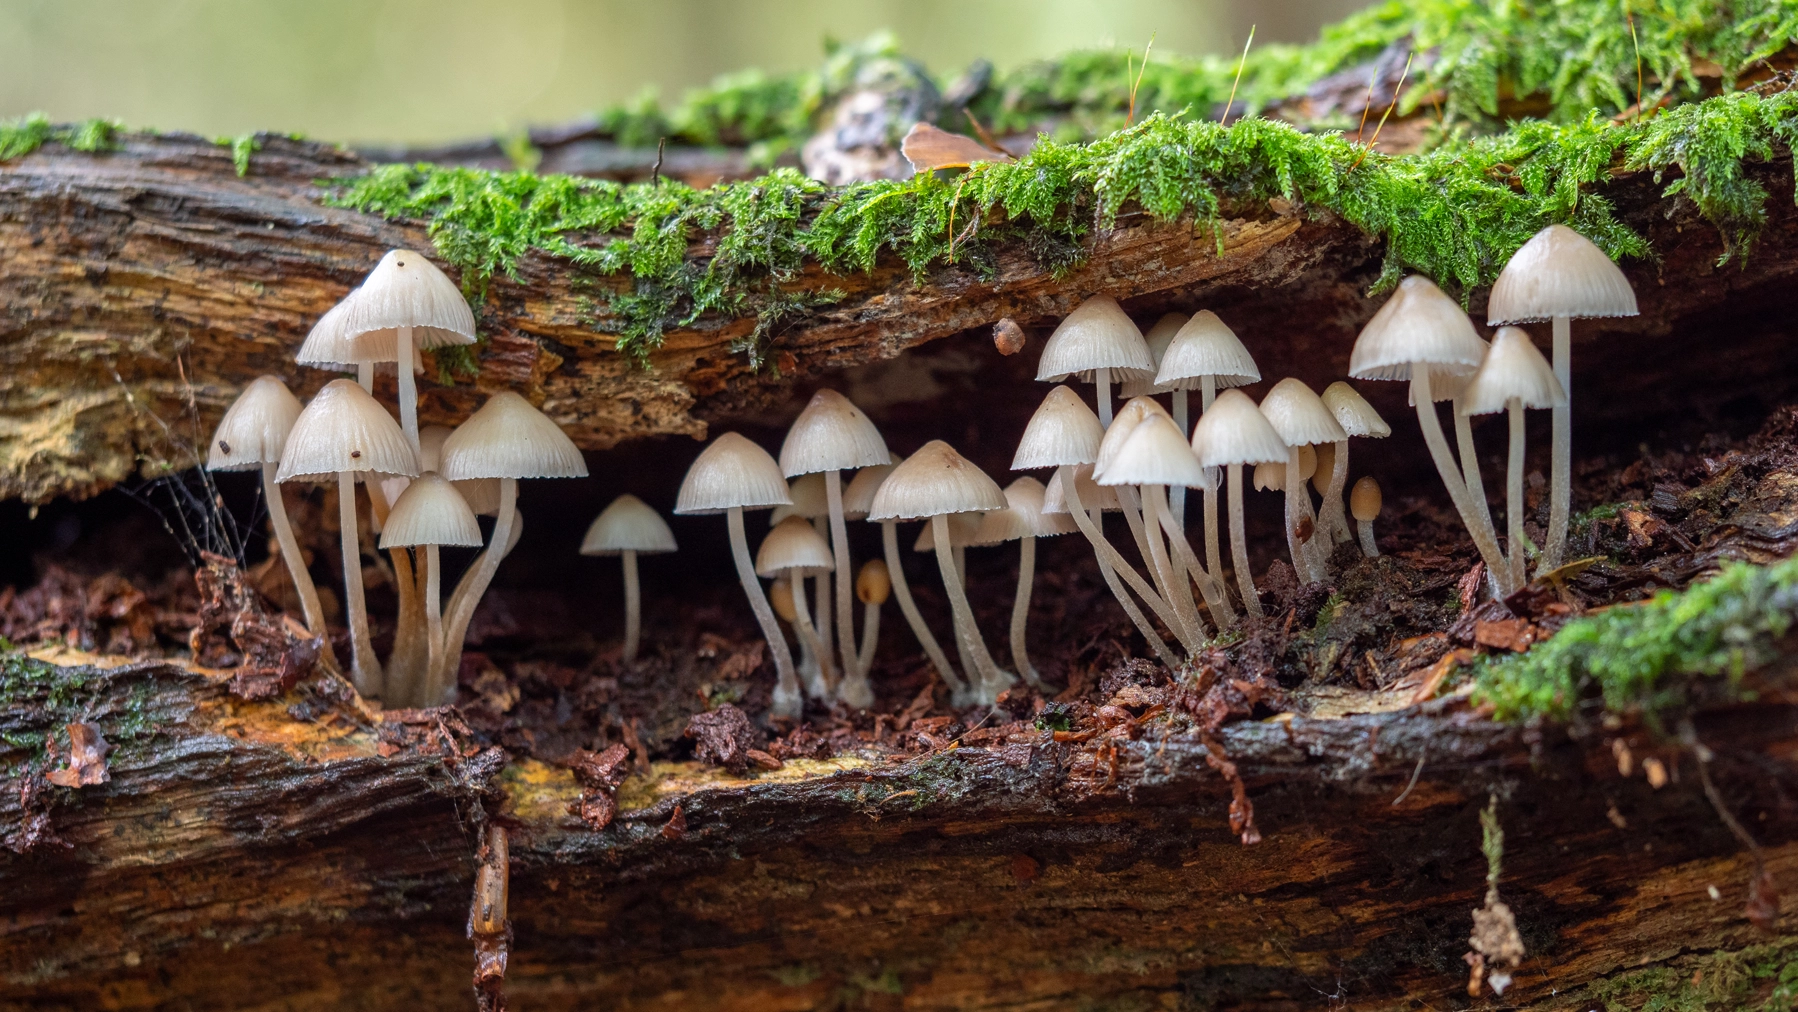 Medicinal mycology: The therapeutic benefits of mushrooms